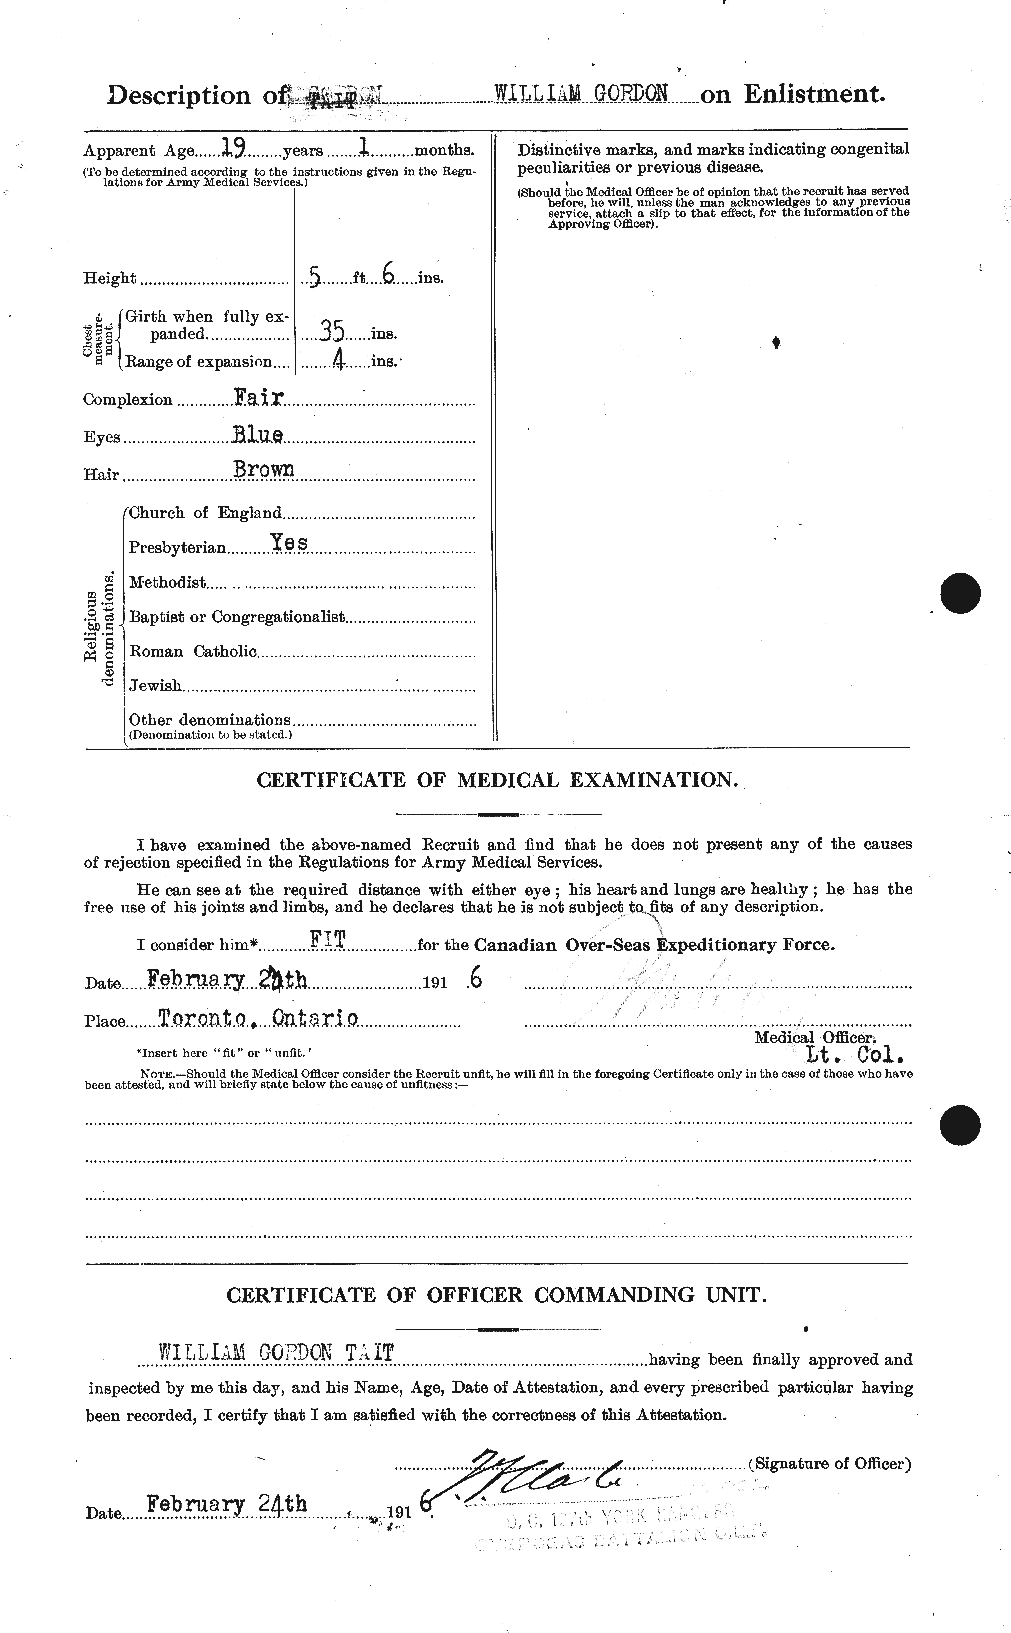 Personnel Records of the First World War - CEF 126976b